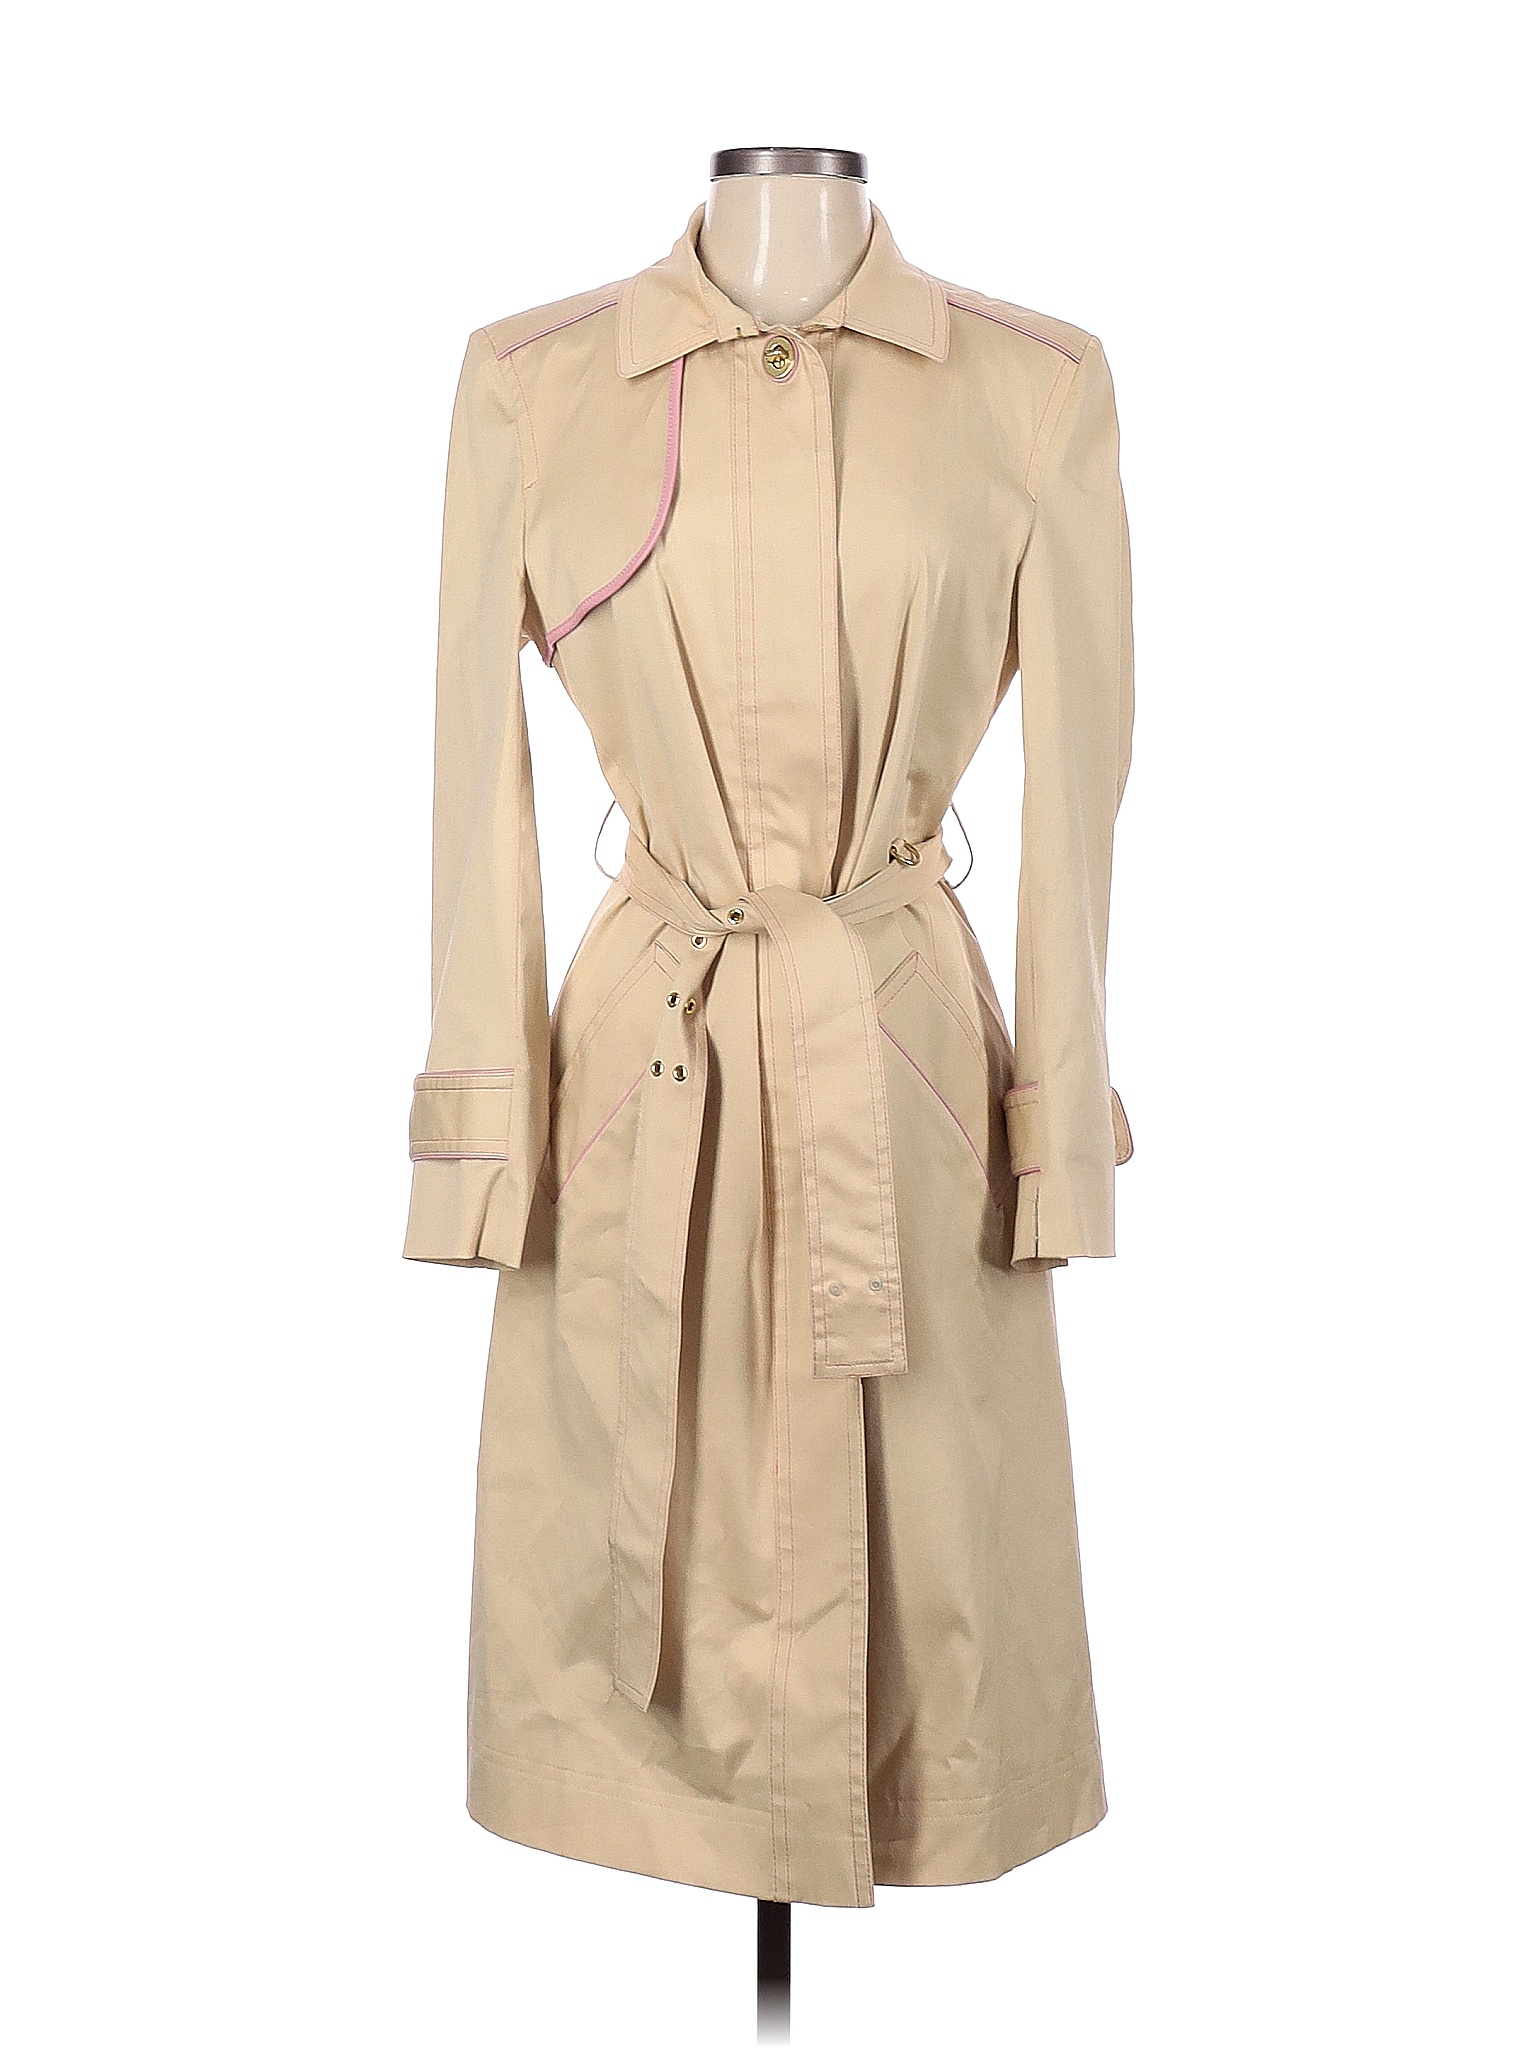 Coach Solid Tan Trenchcoat Size 4 - 77% off | thredUP